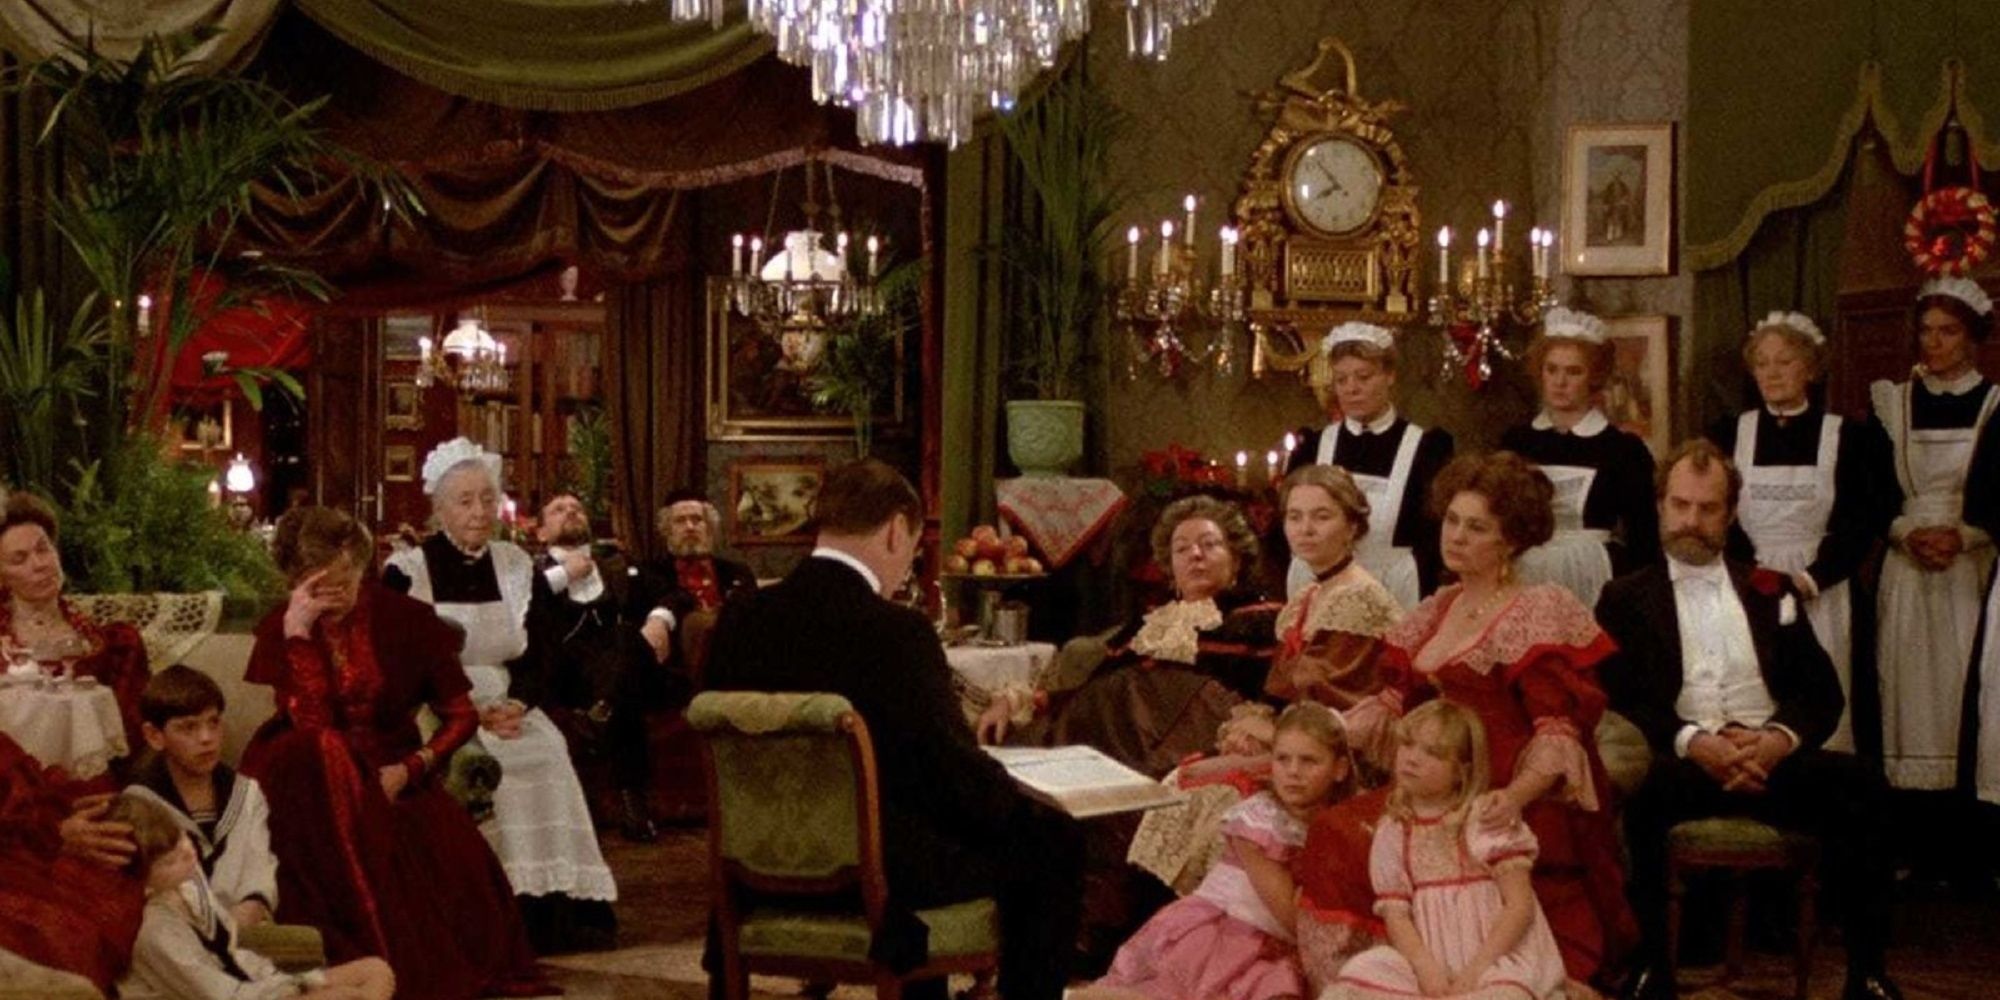 Fanny and Alexander sitting with their large family in 'Fanny and Alexander.'